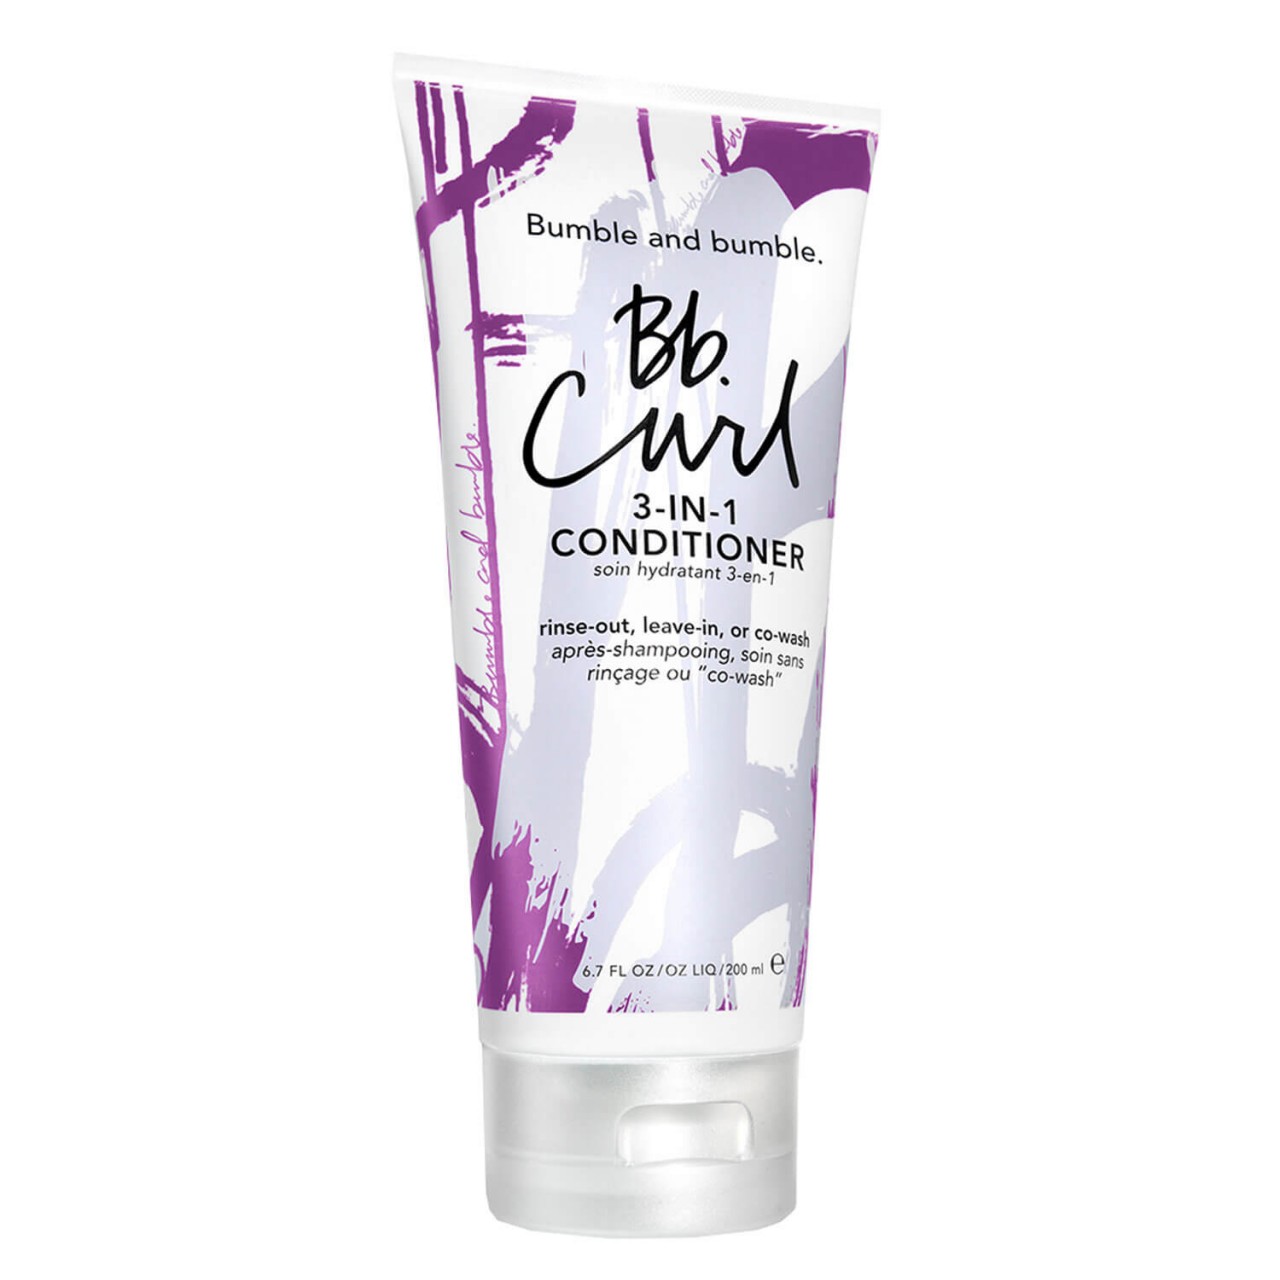 Bb. Curl - 3-in-1 Conditioner von Bumble and bumble.